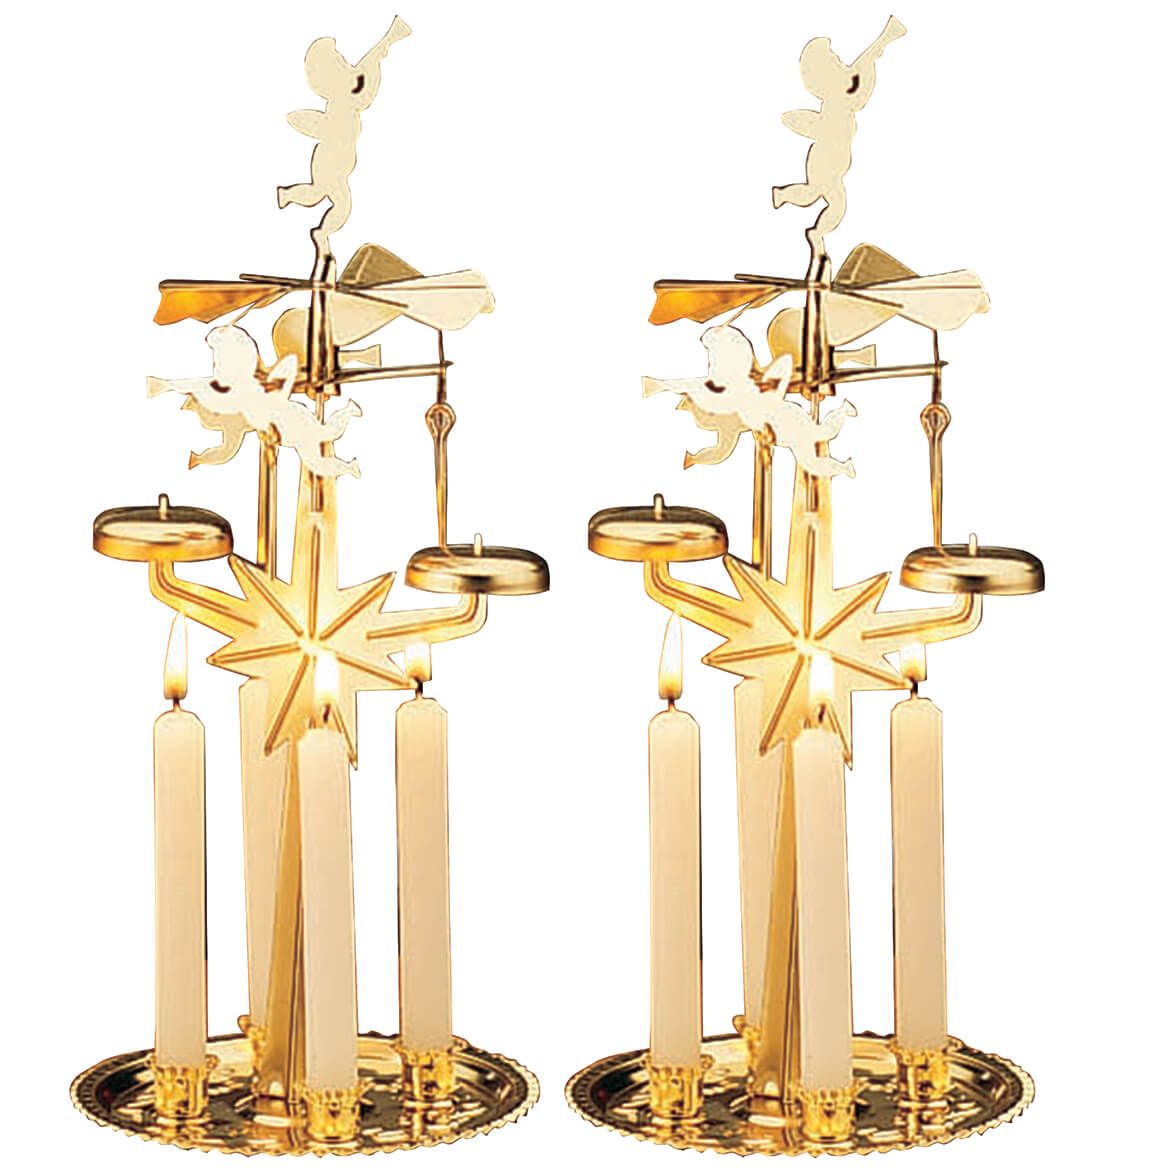 Angel Abra Carousel and Candles, Set of 2 + '-' + 371419